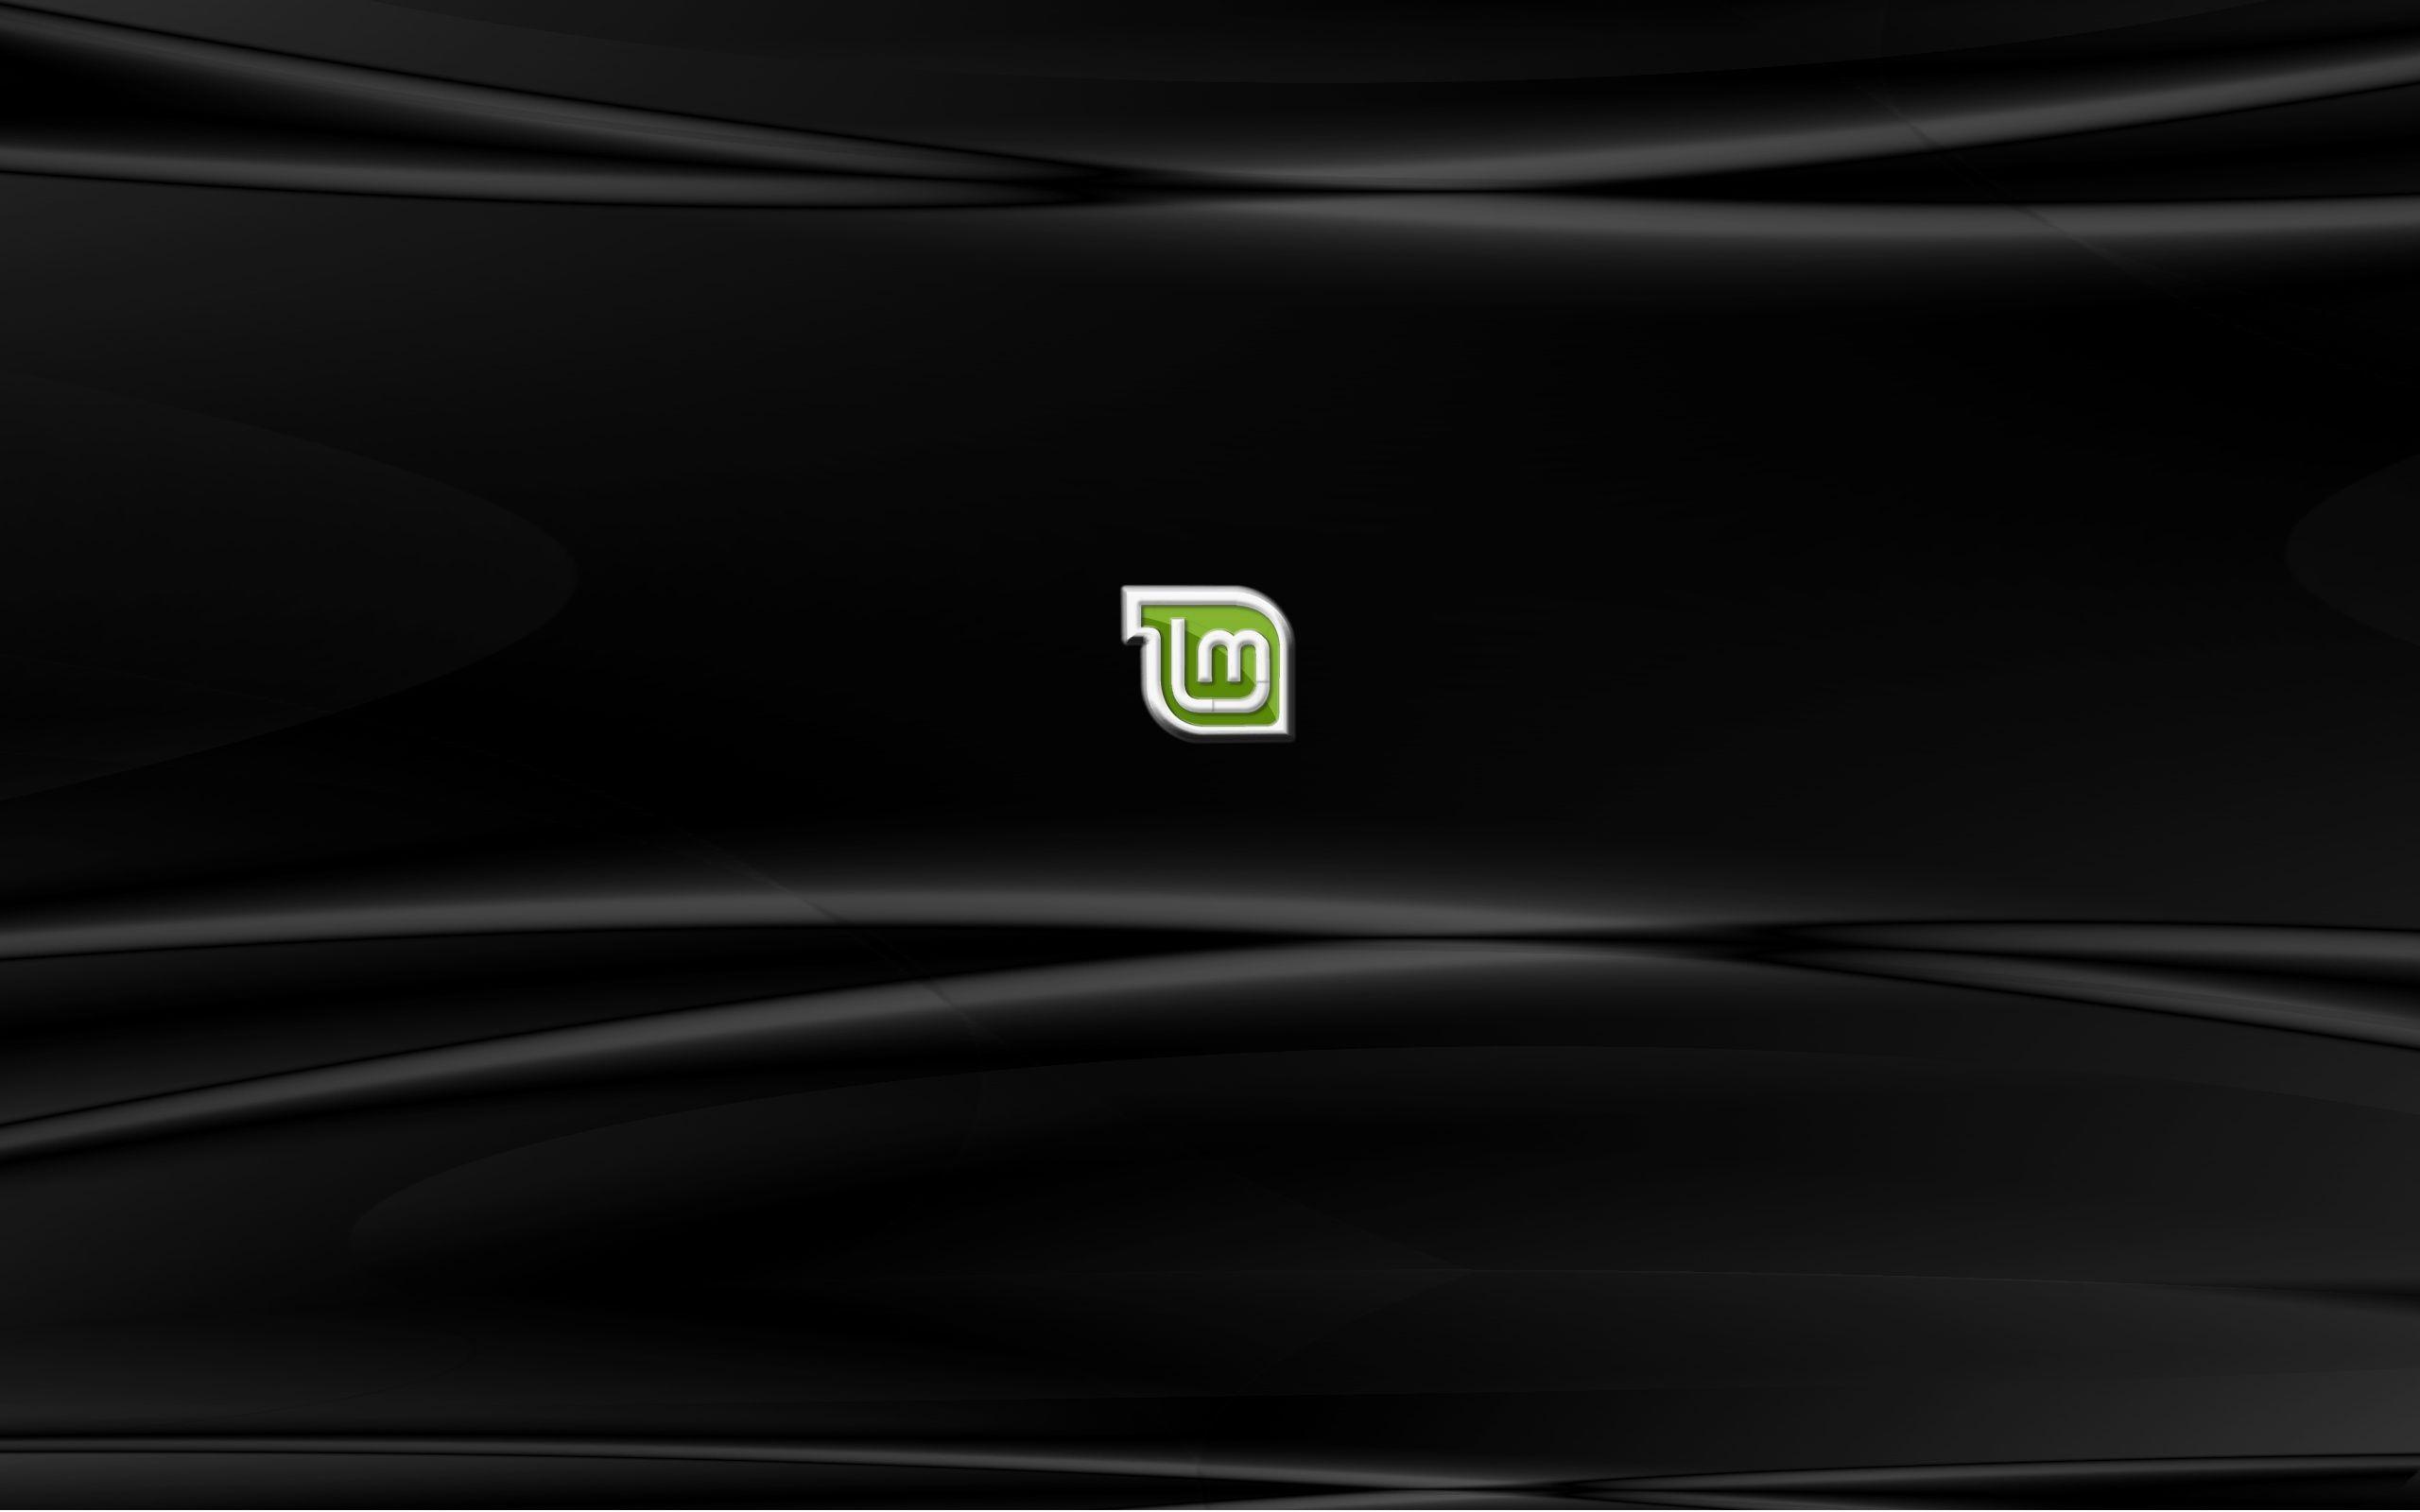 Linux Mint Forums • View topic Wallpaper Shapes!